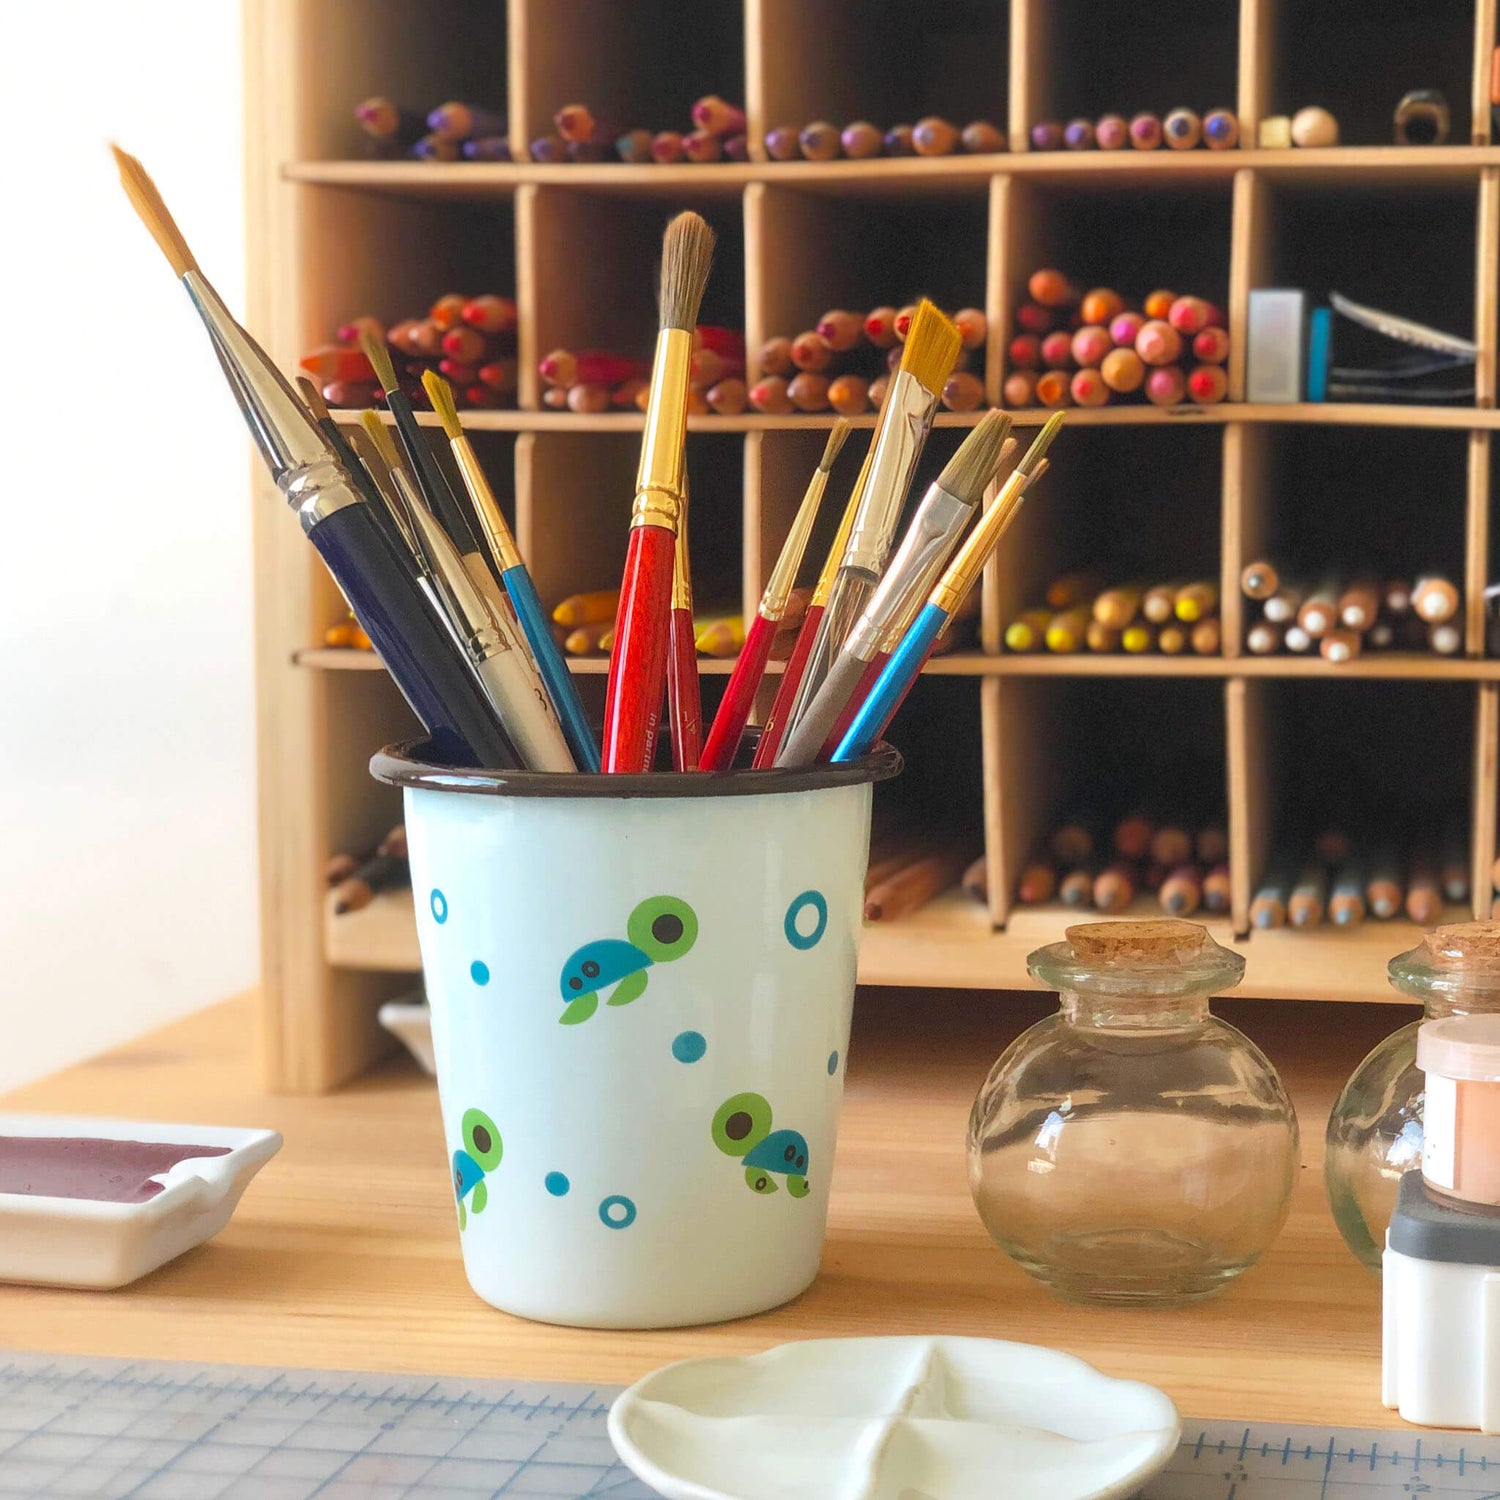 Assorted paintbrushes are held in a light blue pen cup decorated with a sea turtle illustration pattern on a wooden desk. Ceramic and glass containers are arranged nearby, and a storage holder contains colored pencils in the background.